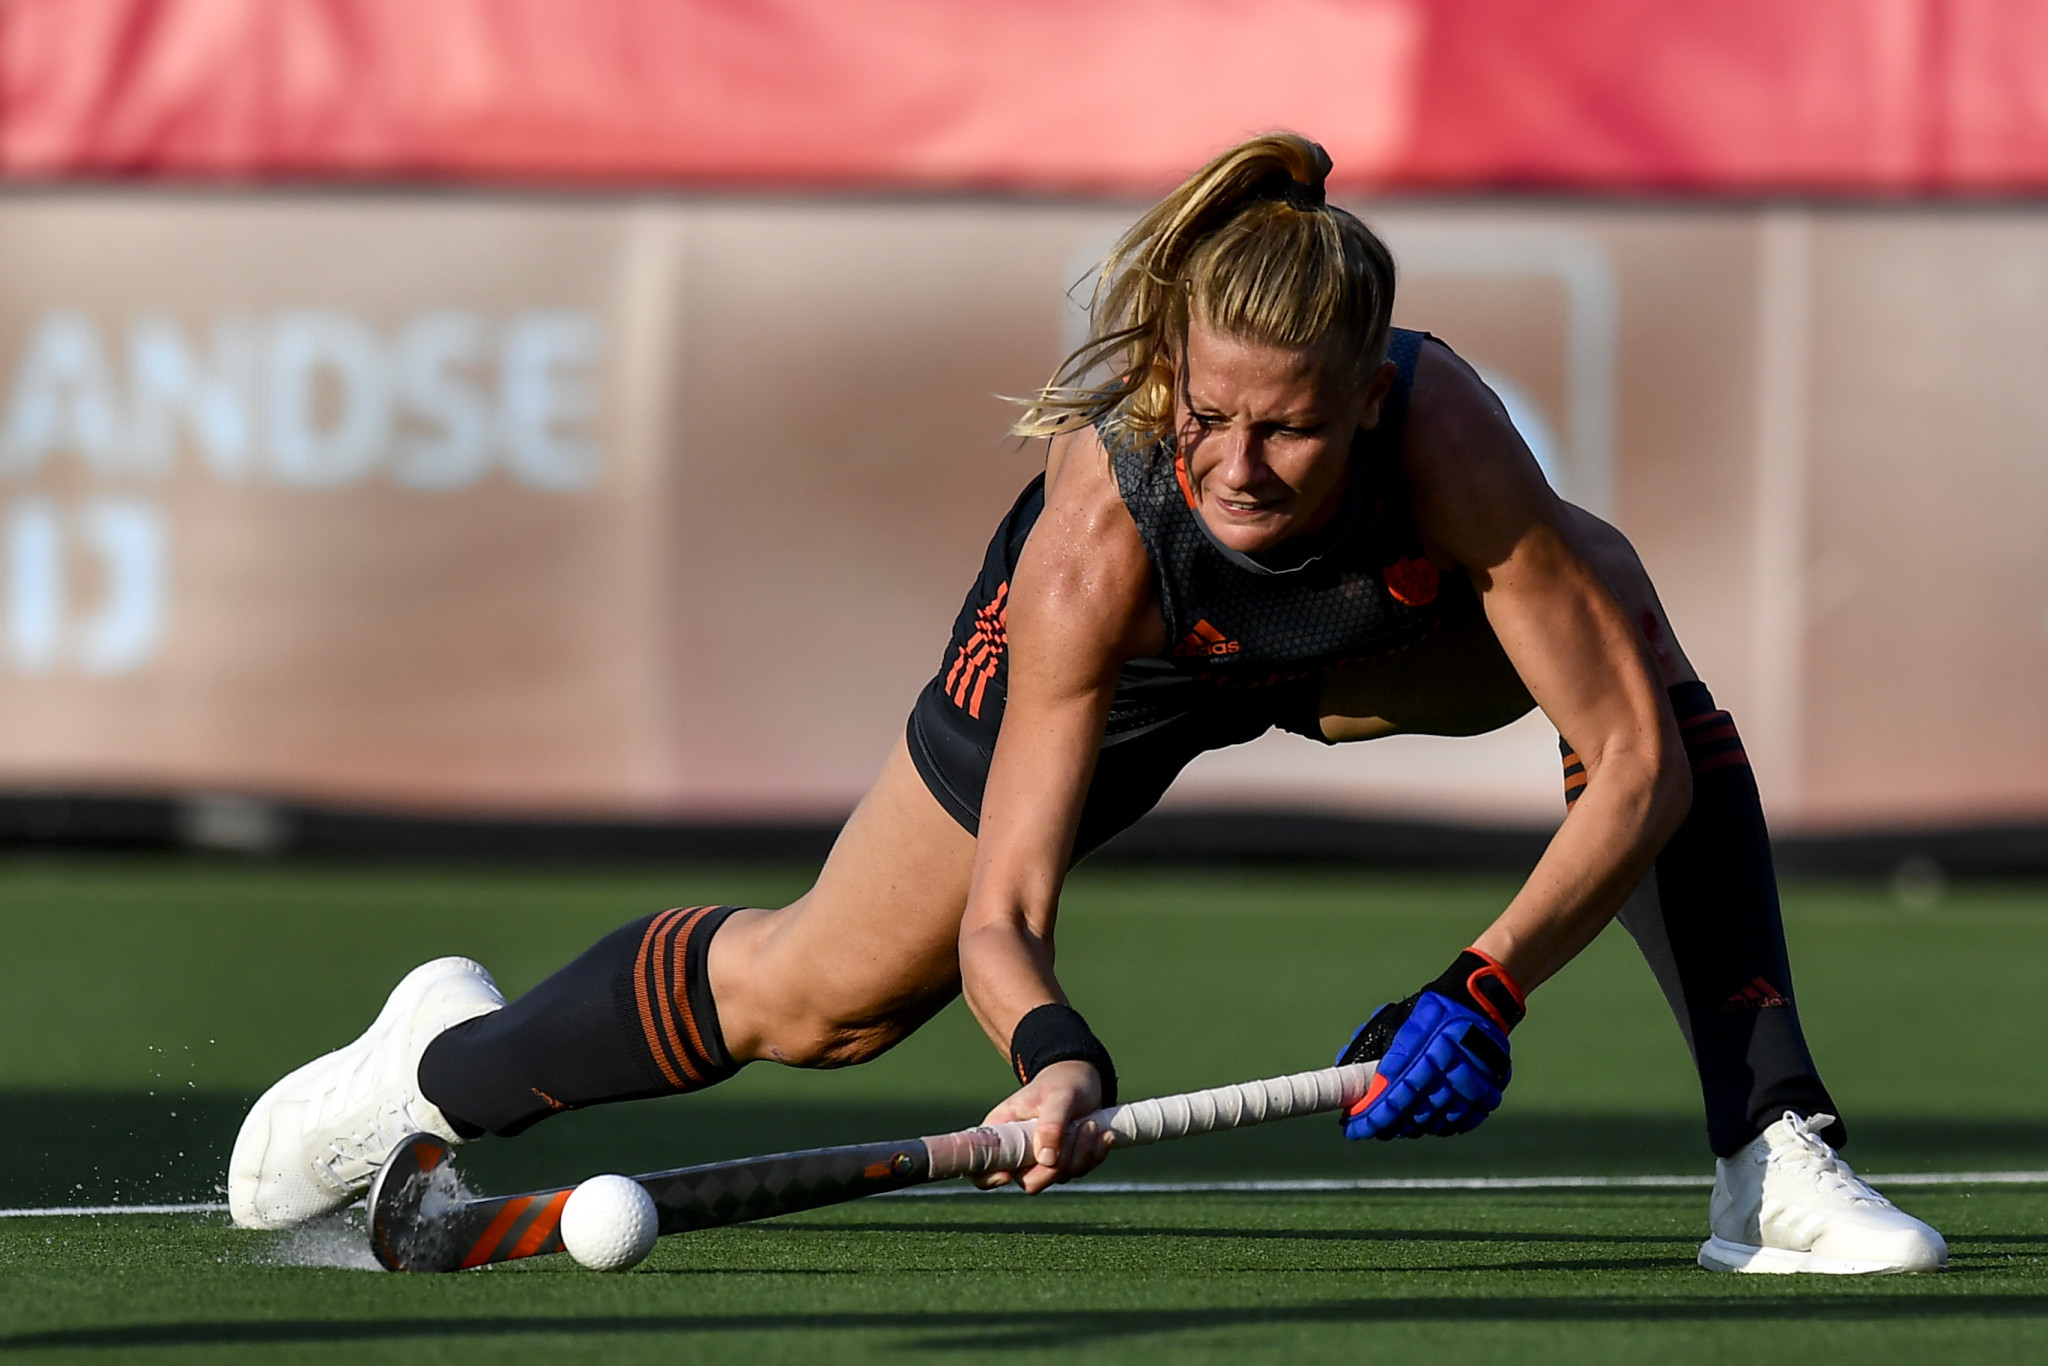 The Netherlands earned their third successive victory in the women's FIH Pro League ©Getty Images